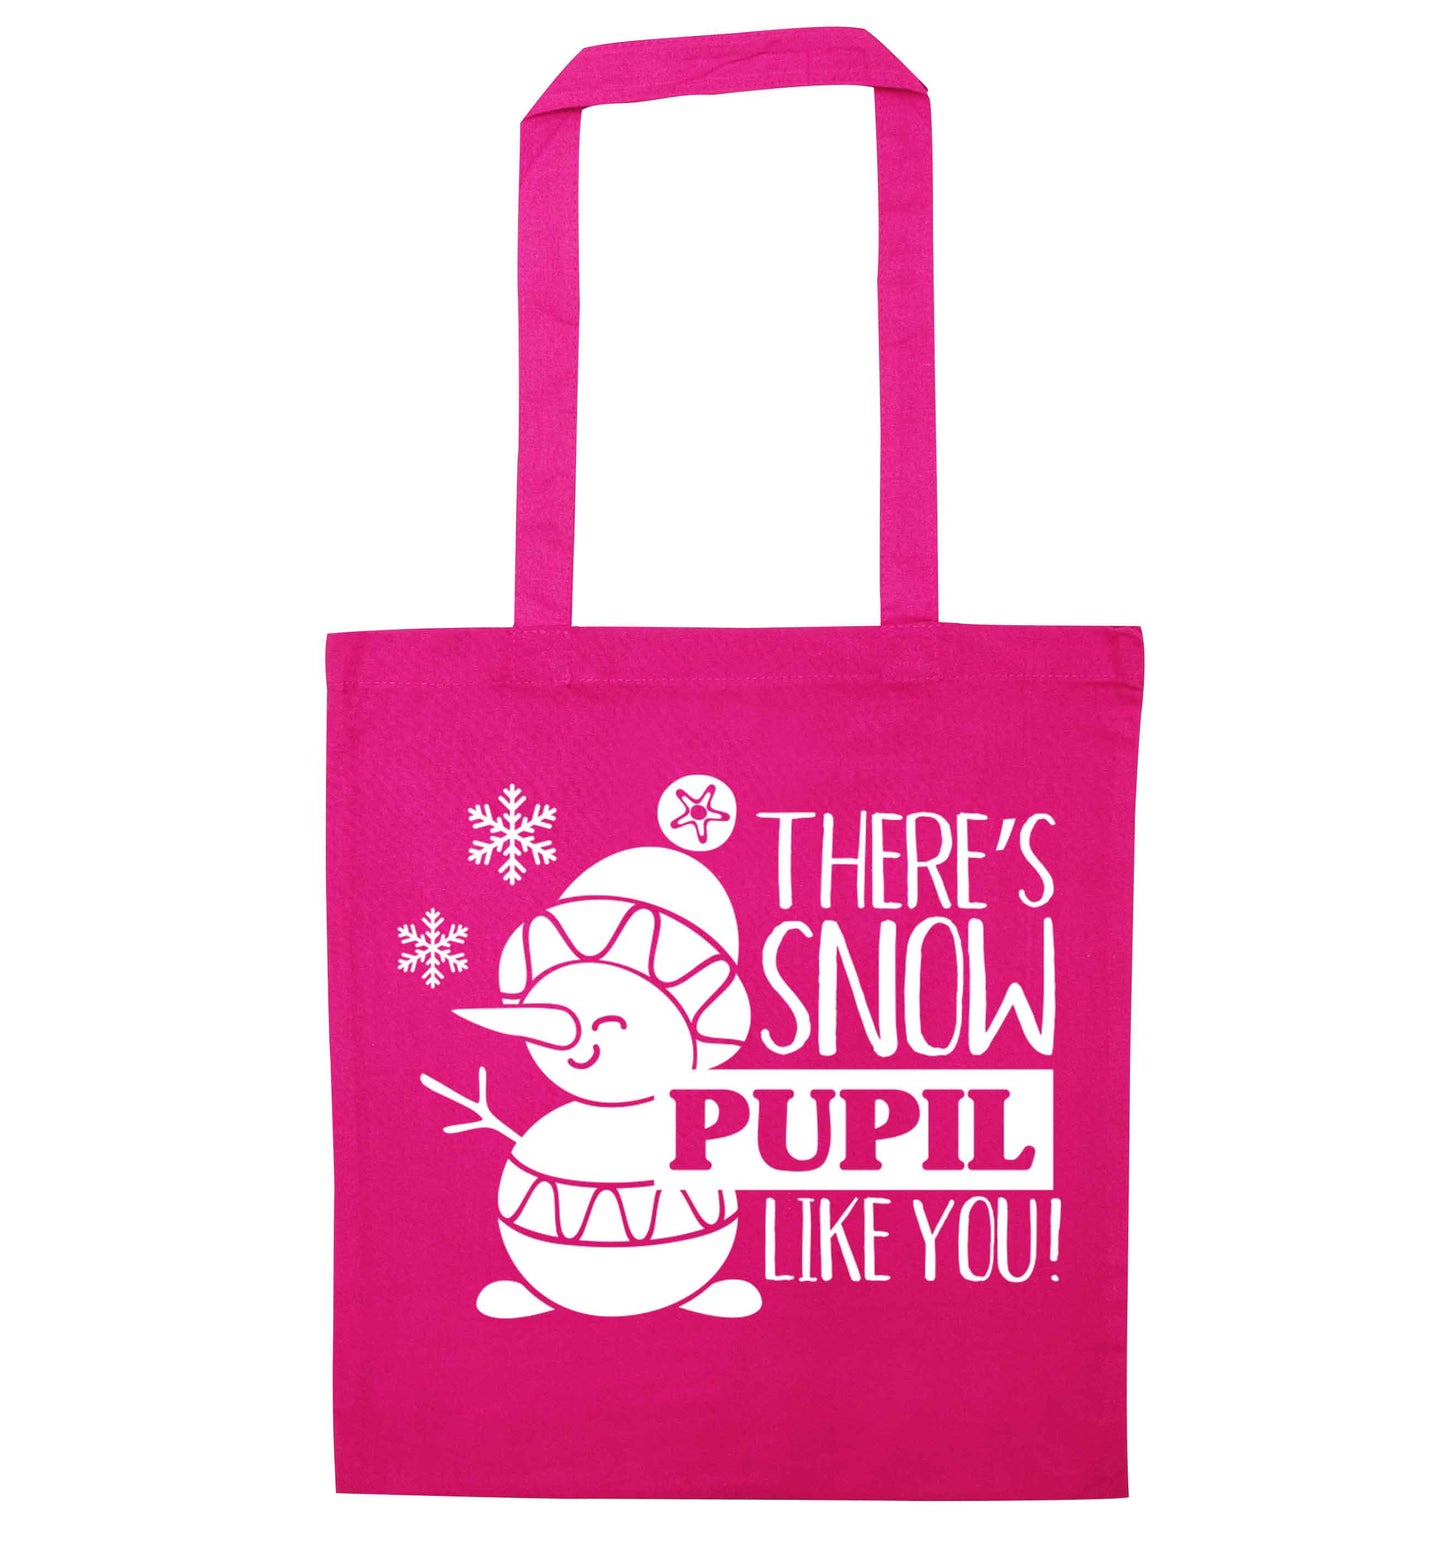 There's snow pupil like you pink tote bag